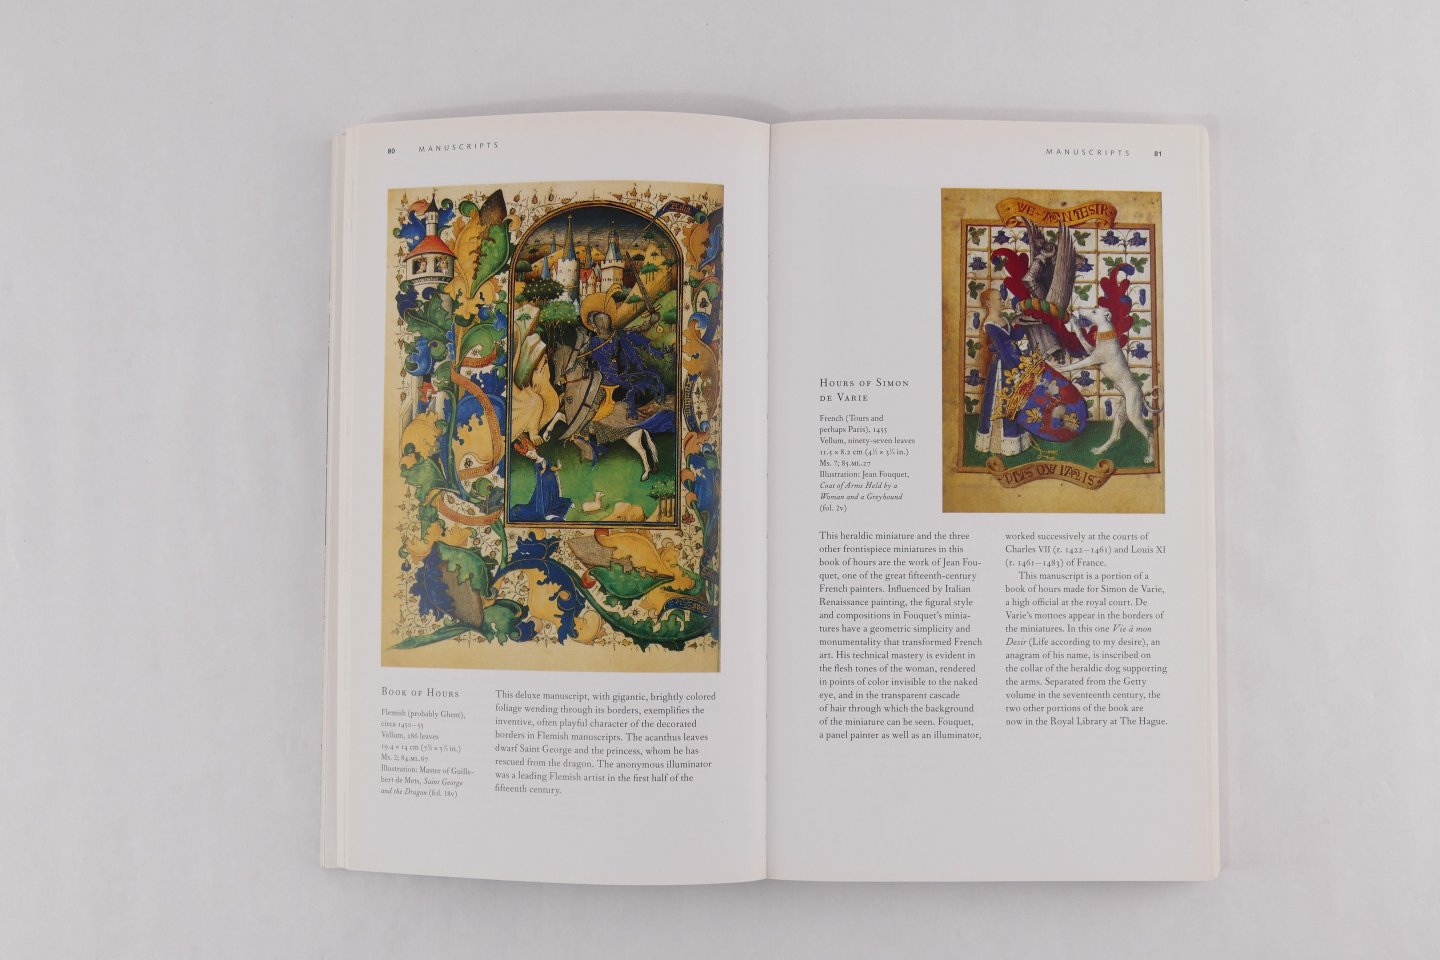 Greenberg, Mark - The J. Paul Getty Museum, handbook of the Collections